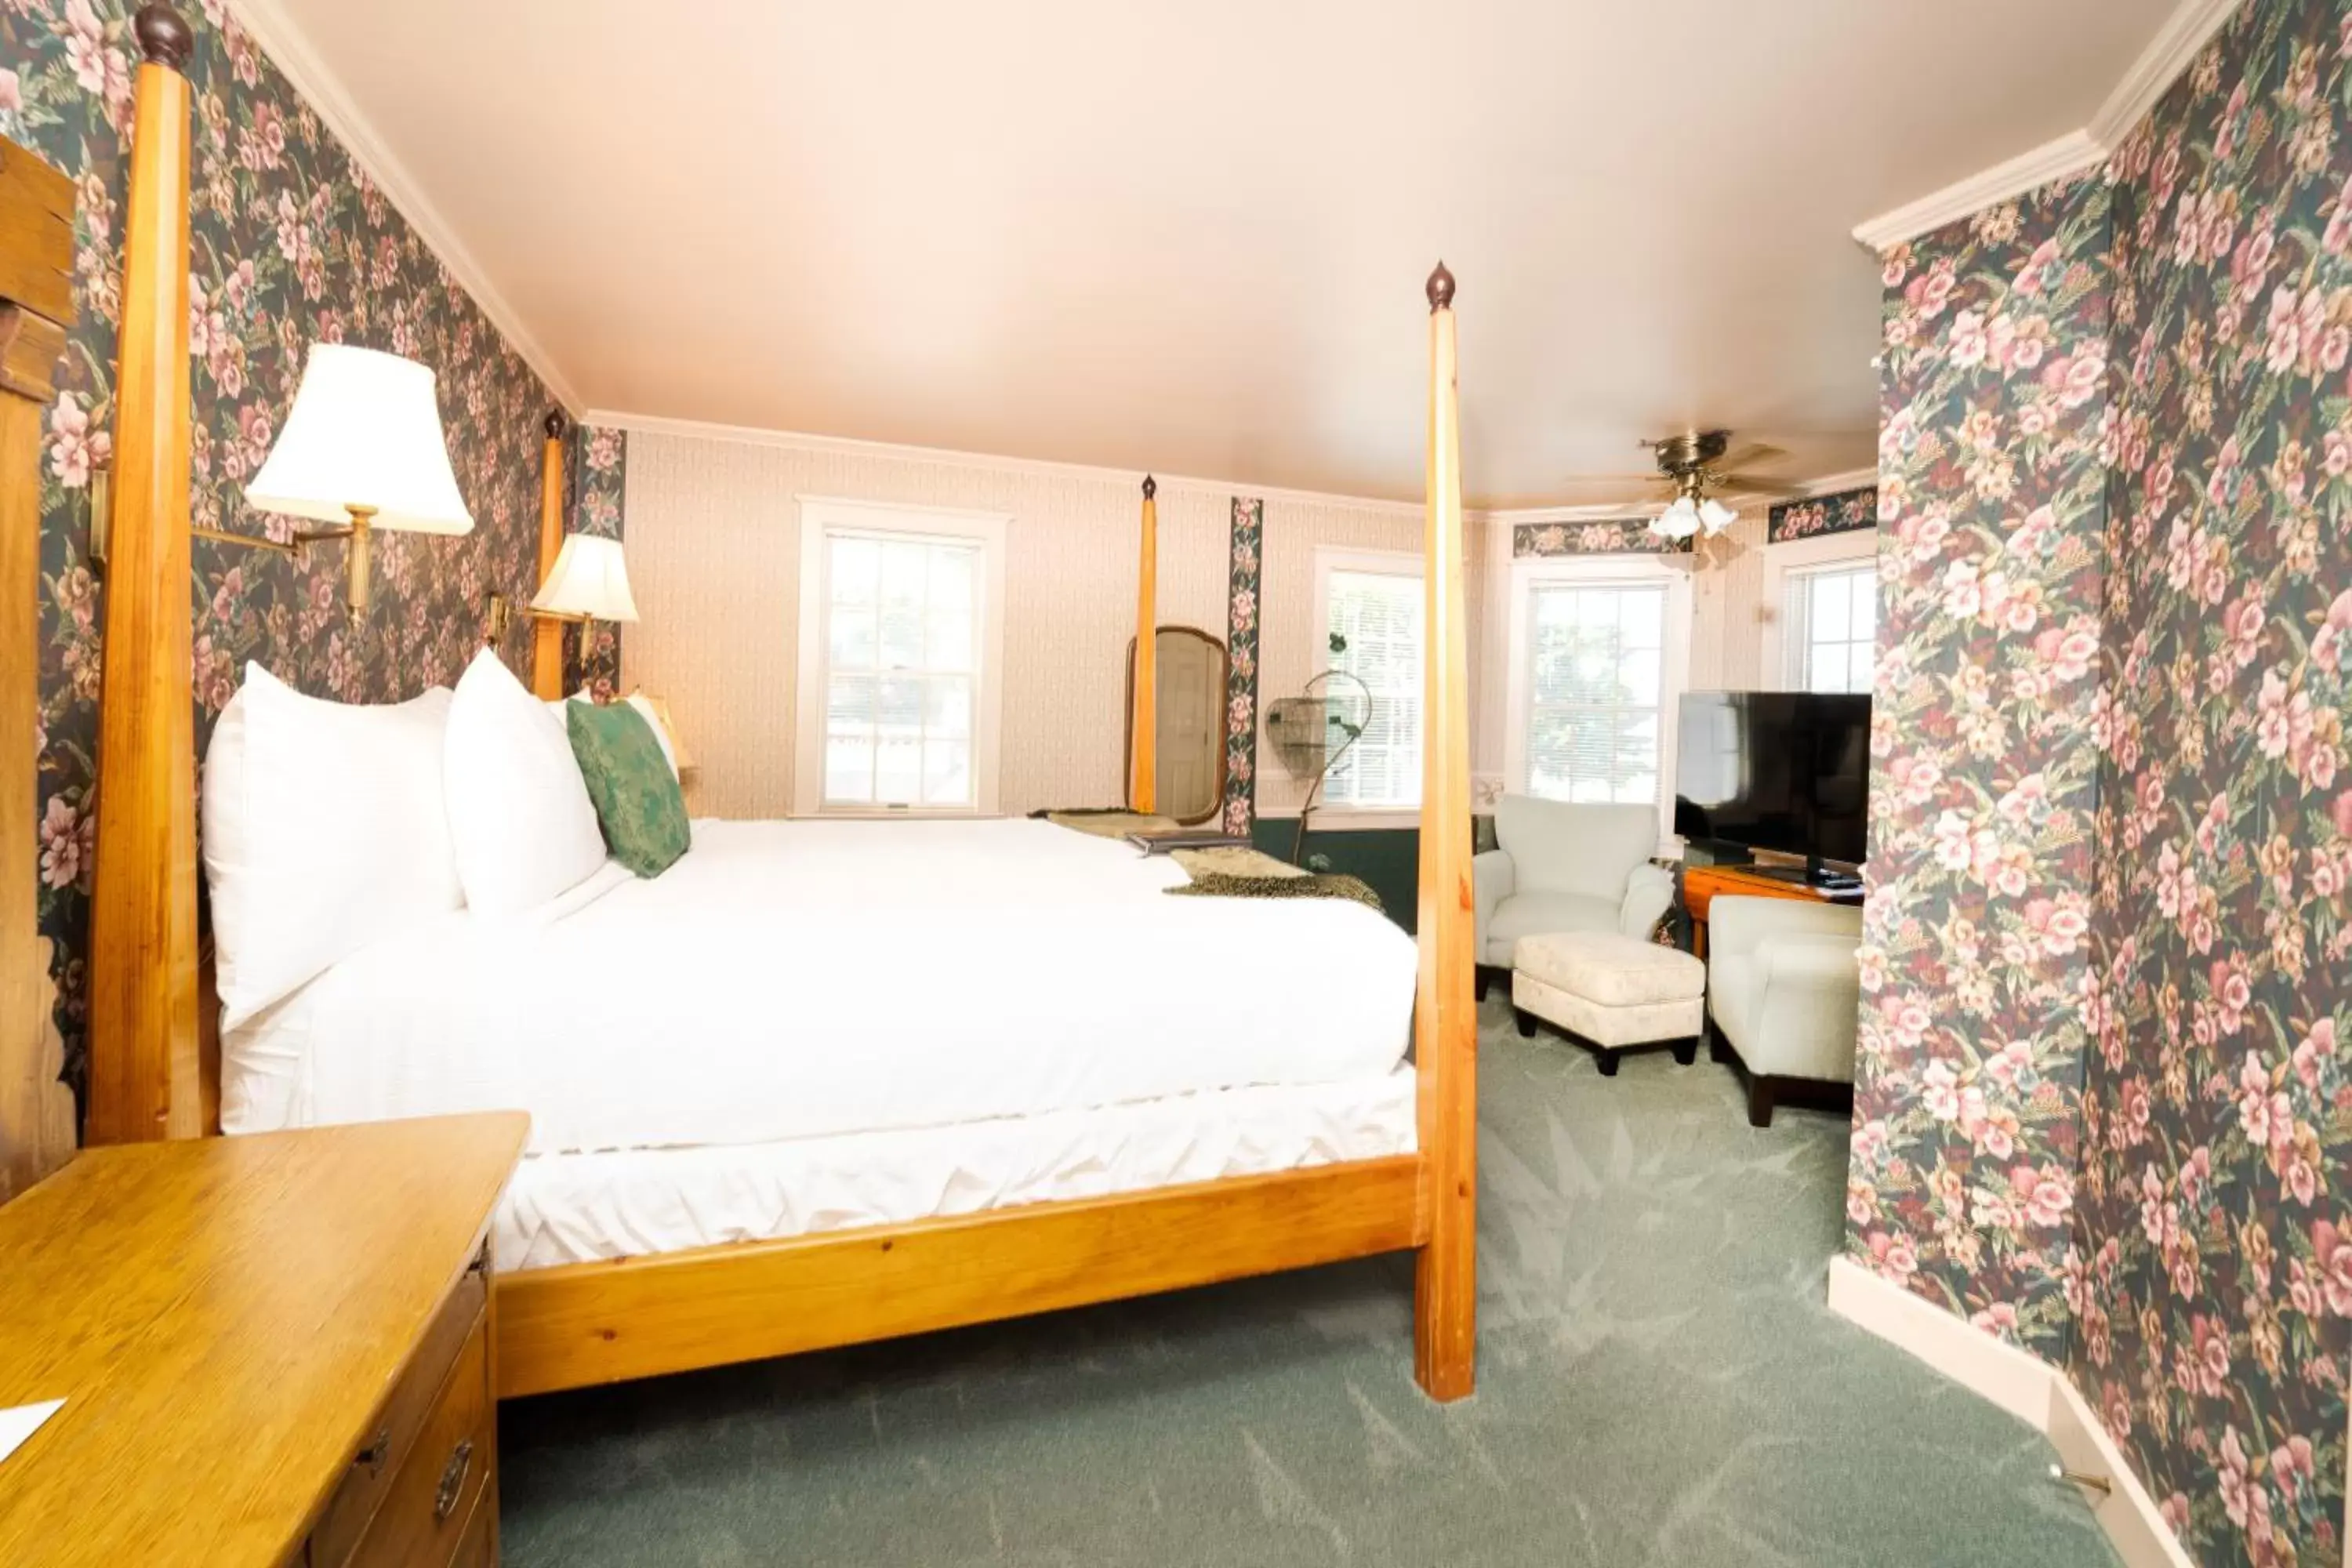 King Room in Yelton Manor Bed and Breakfast